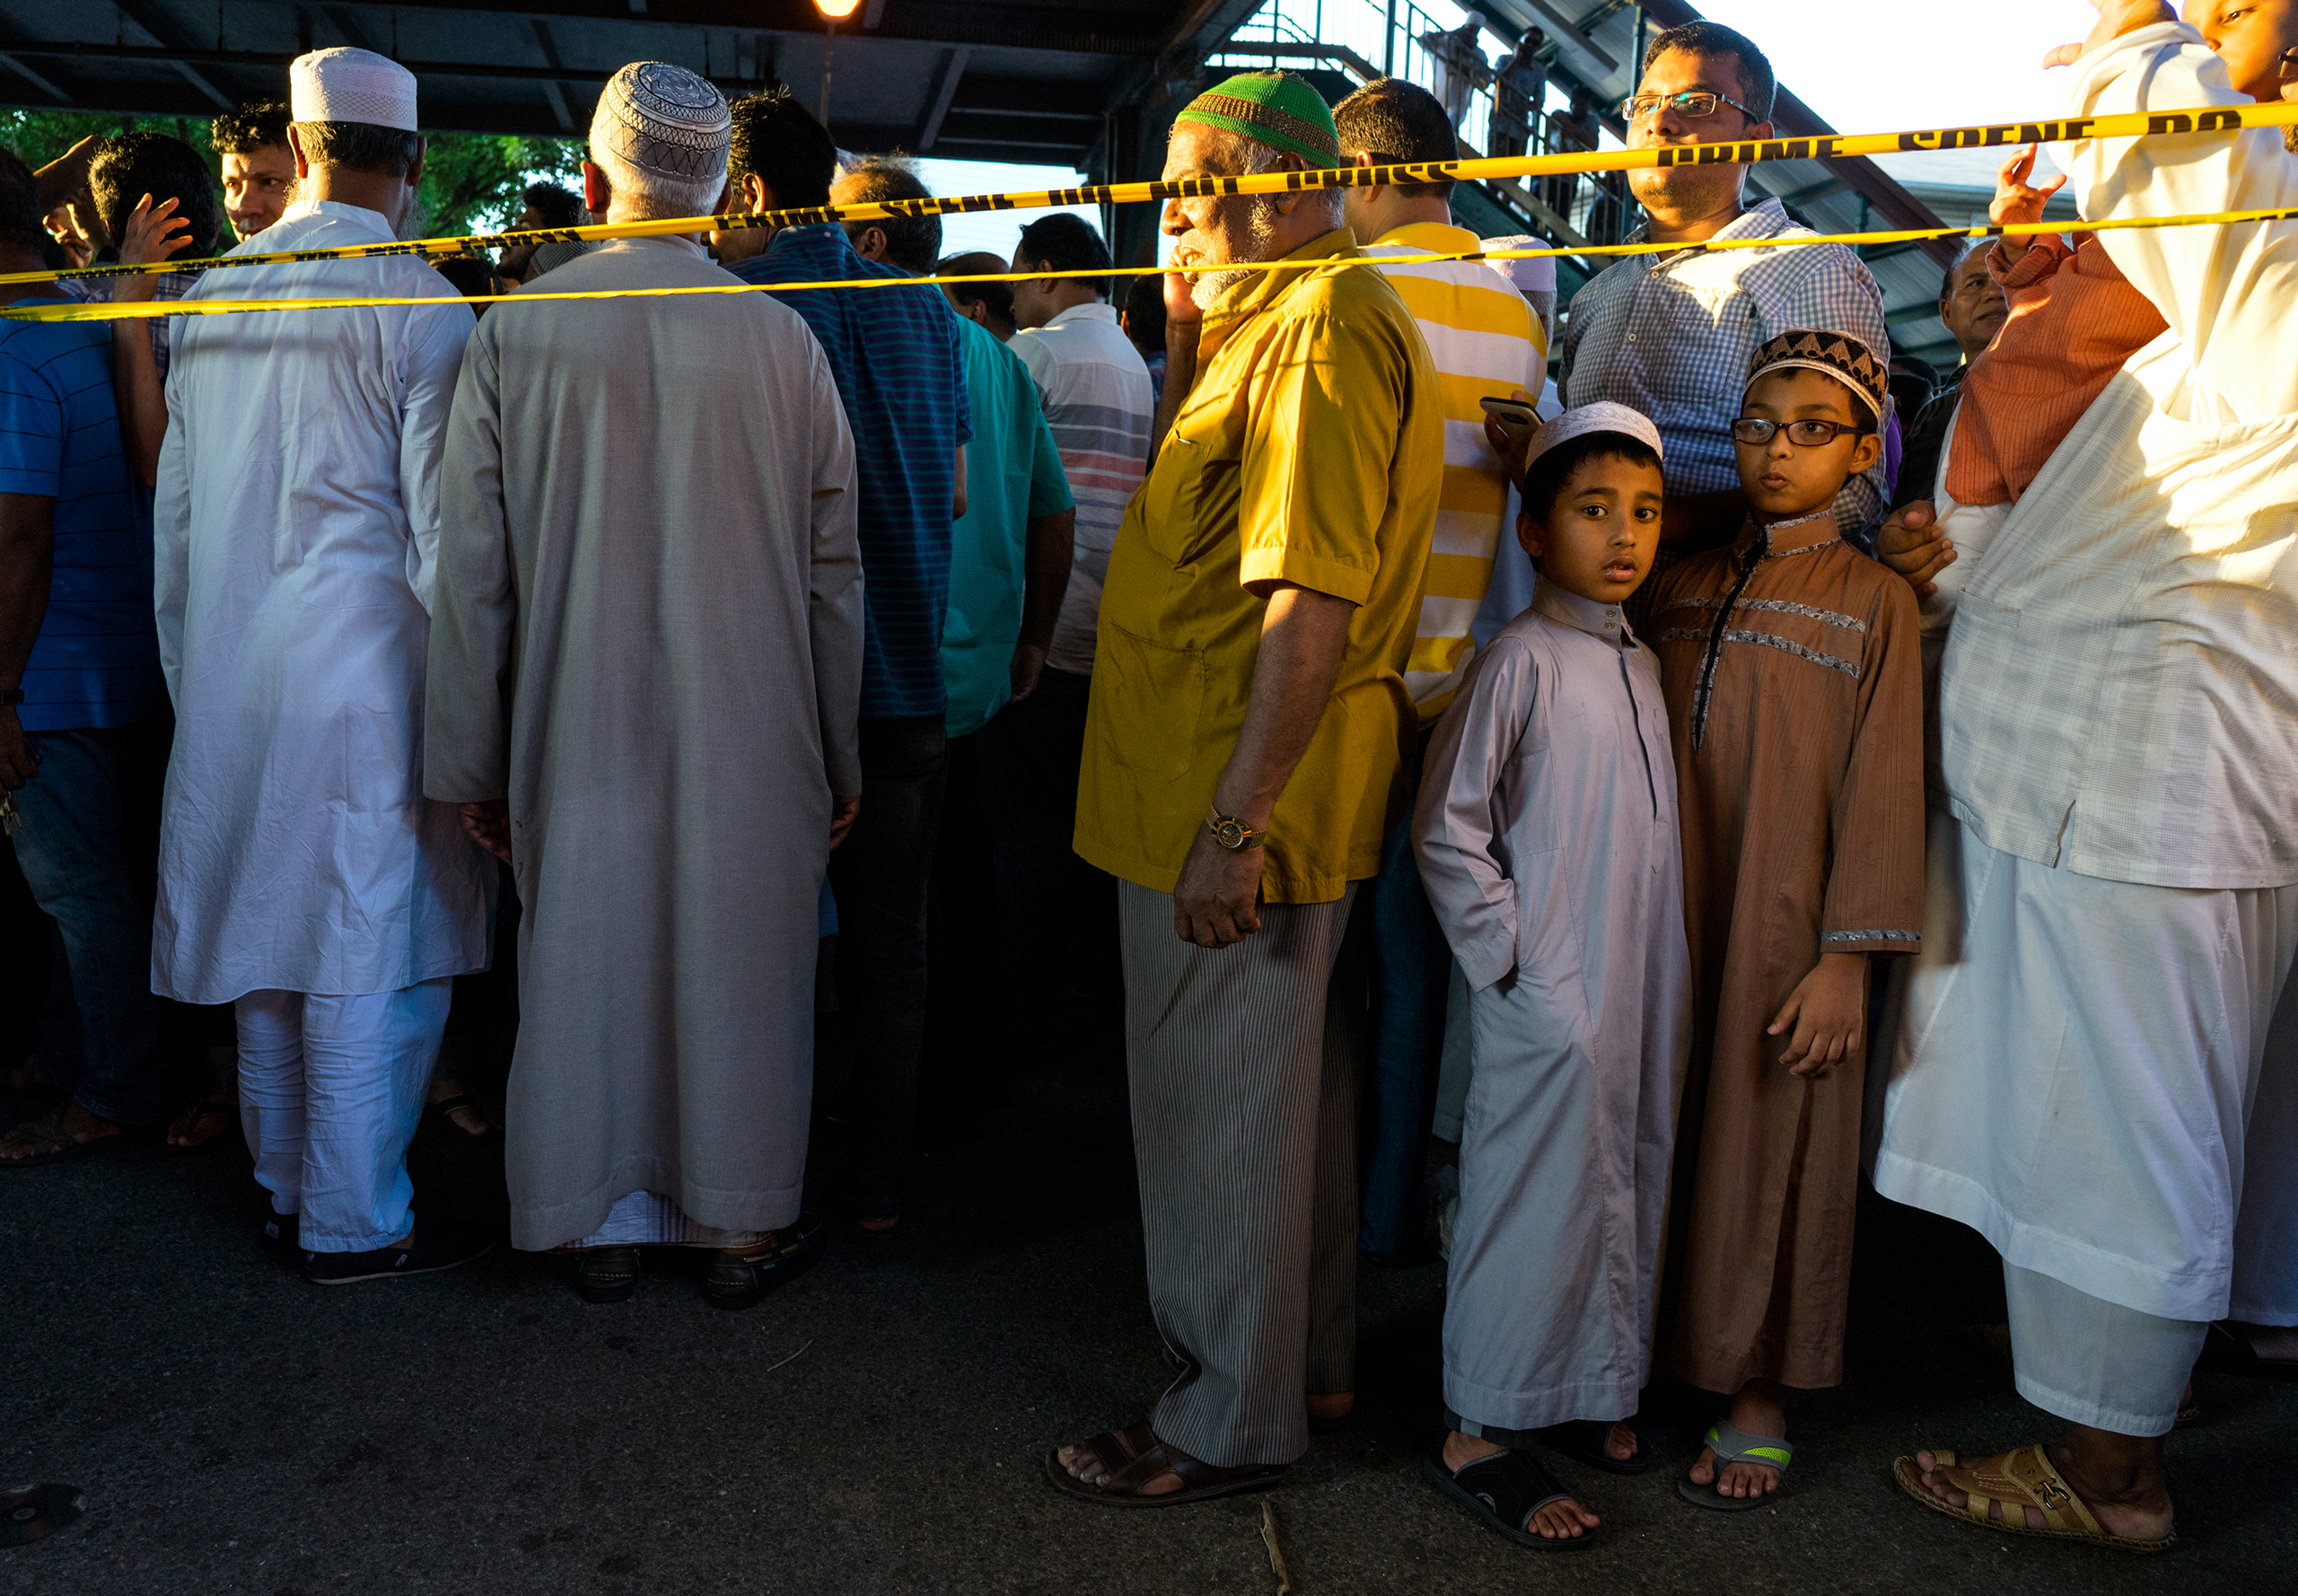 People gather for a demonstration near a crime scene where 55-year-old Imam Maulama Akonjee and his 64-year-old associate, Tharam Uddin, were shot in the back of the head left the Al-Furqan Jame Masjid mosque in the Ozone Park section of Queens in New York City on Aug. 13, 2016, . (Craig Ruttle—AP)